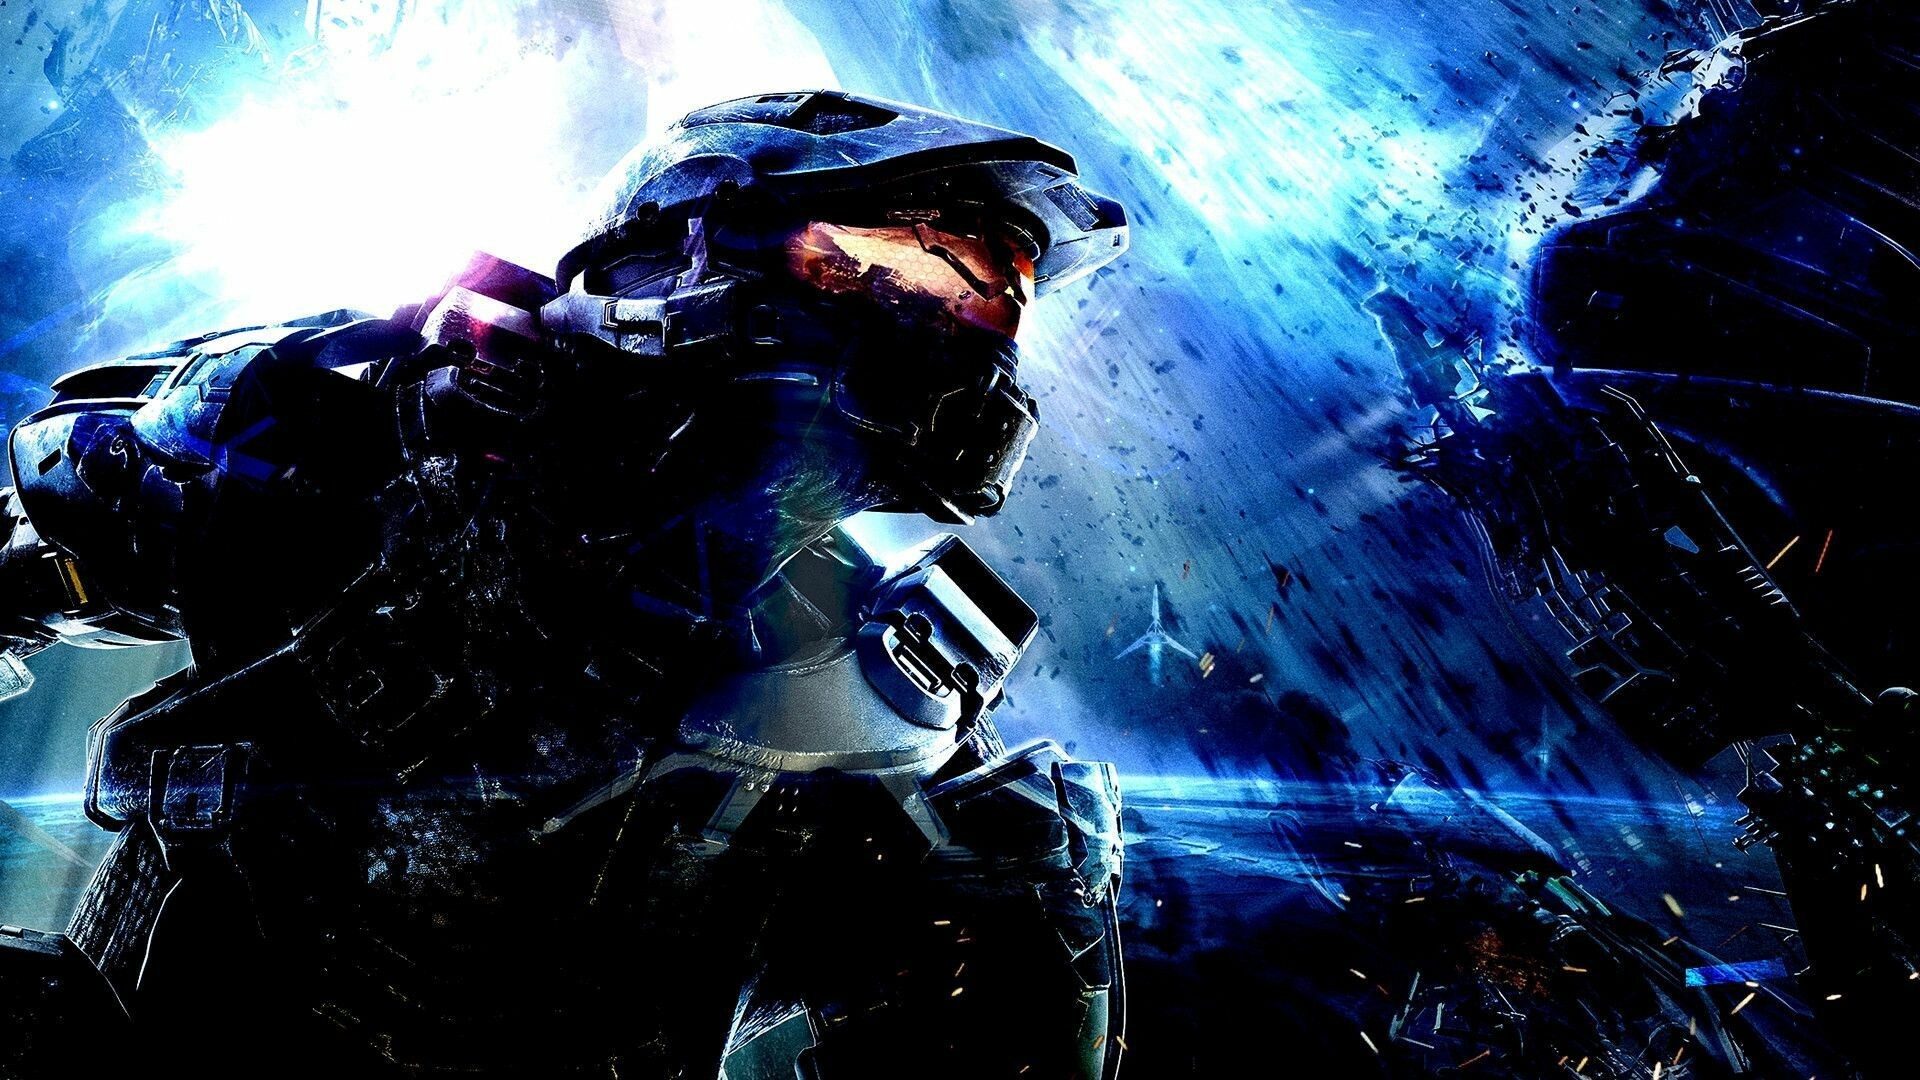 4K Halo Wallpapers